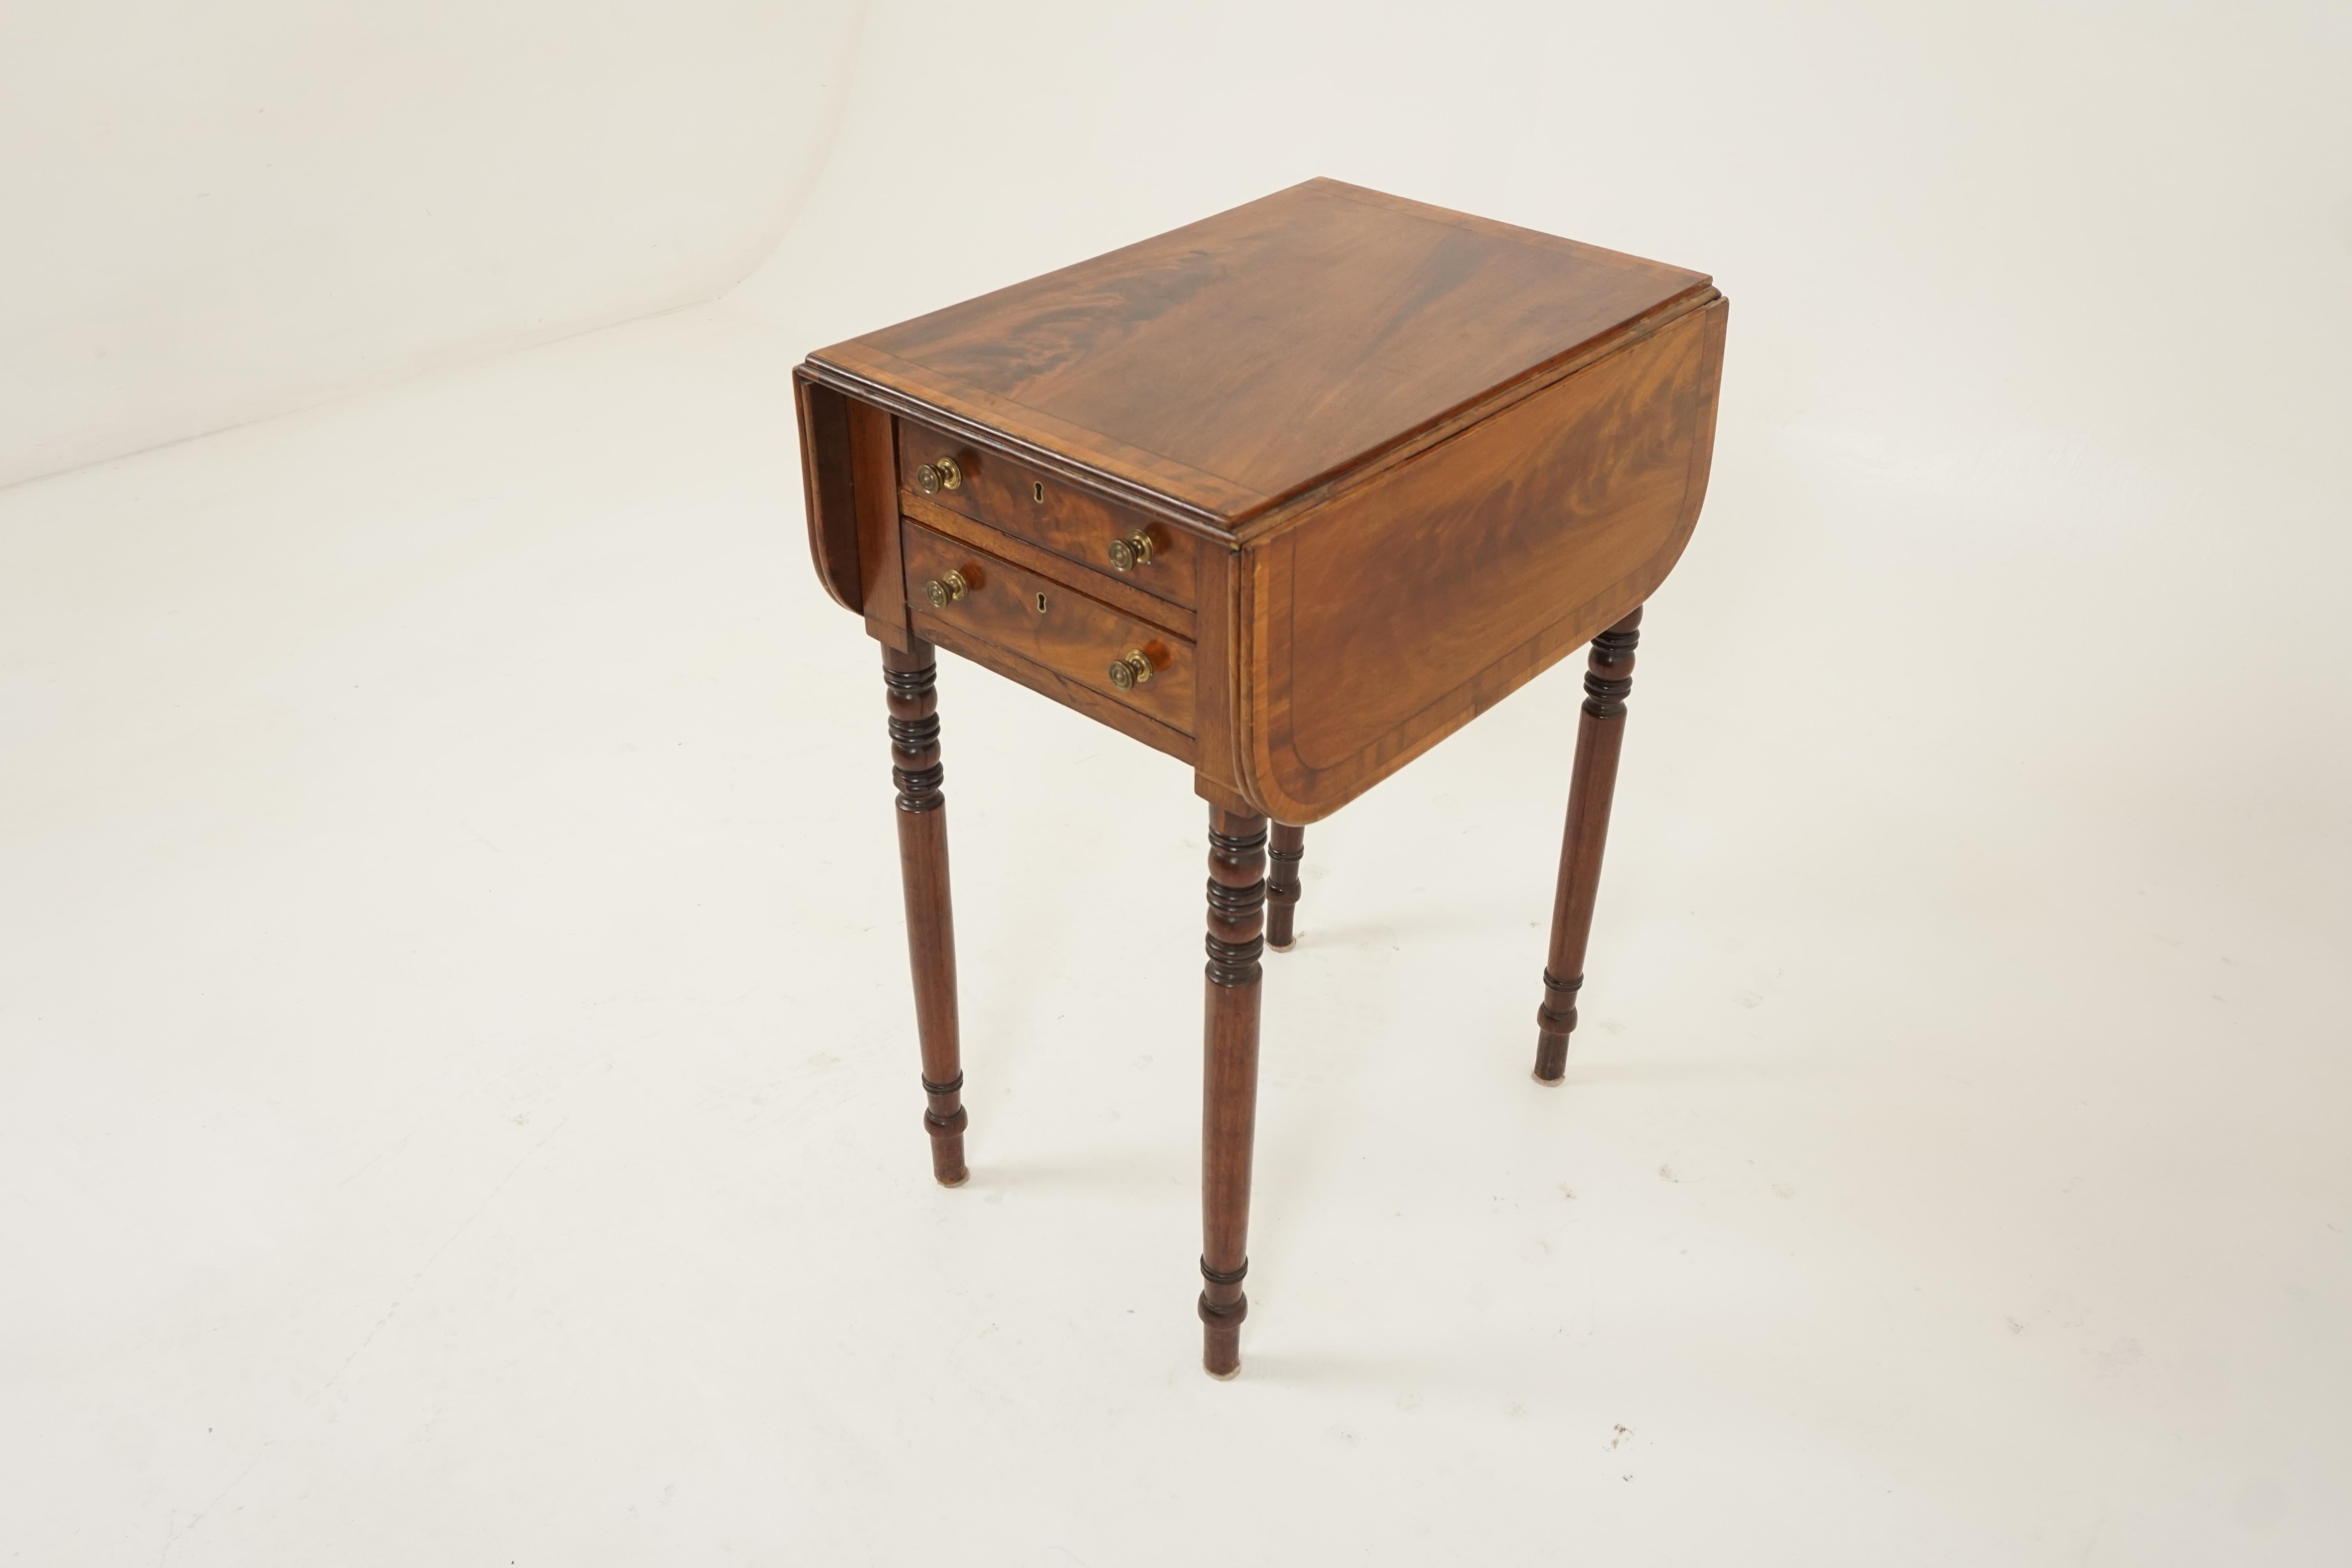 Antique Regency inlaid Pembroke drop leaf table, Scotland 1810, H288

Scotland 1810
Solid Walnut
Original finish
Having a beautiful walnut top
With satinwood cross banding
Pair of string inlaid drawers
All fitted with brass handles
Raised on elegant